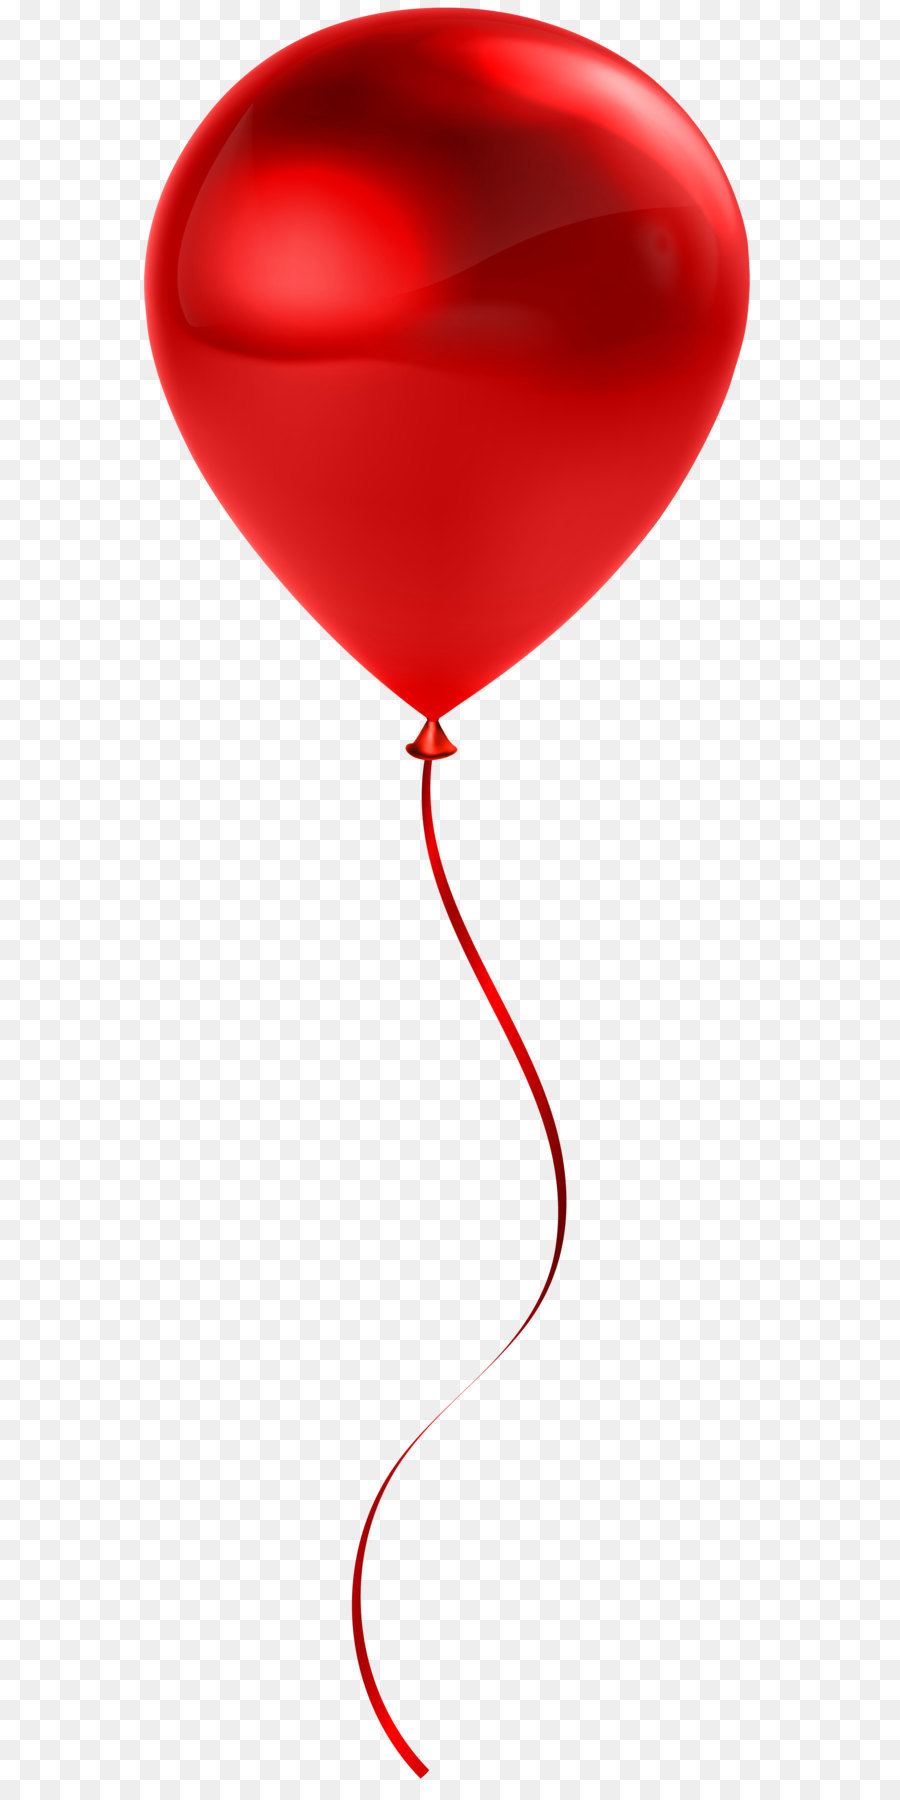 Red Balloon Heart Design - Single Red Balloon Transparent Clip Art png download - 2910*8000 - Free Transparent Balloon png Download.